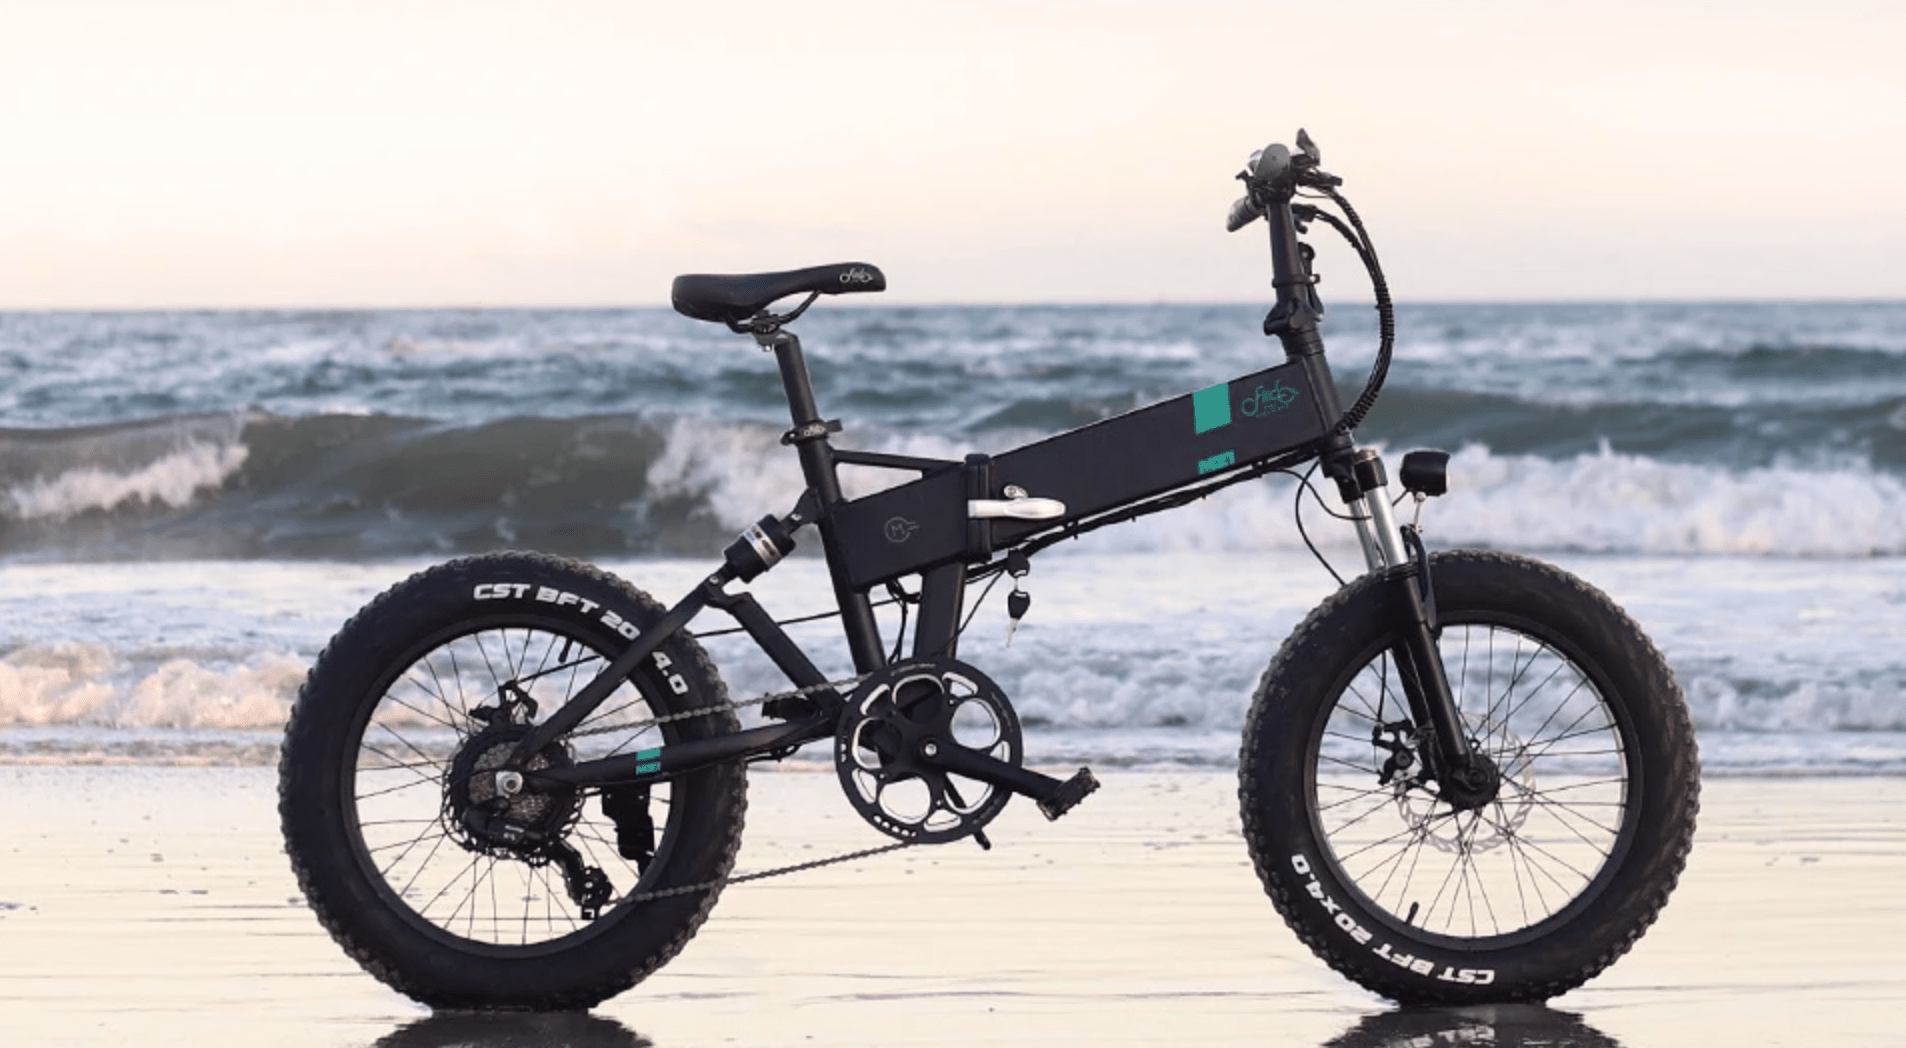 Fiido M21 folding fat tire eBike balanced on beach with waves in background